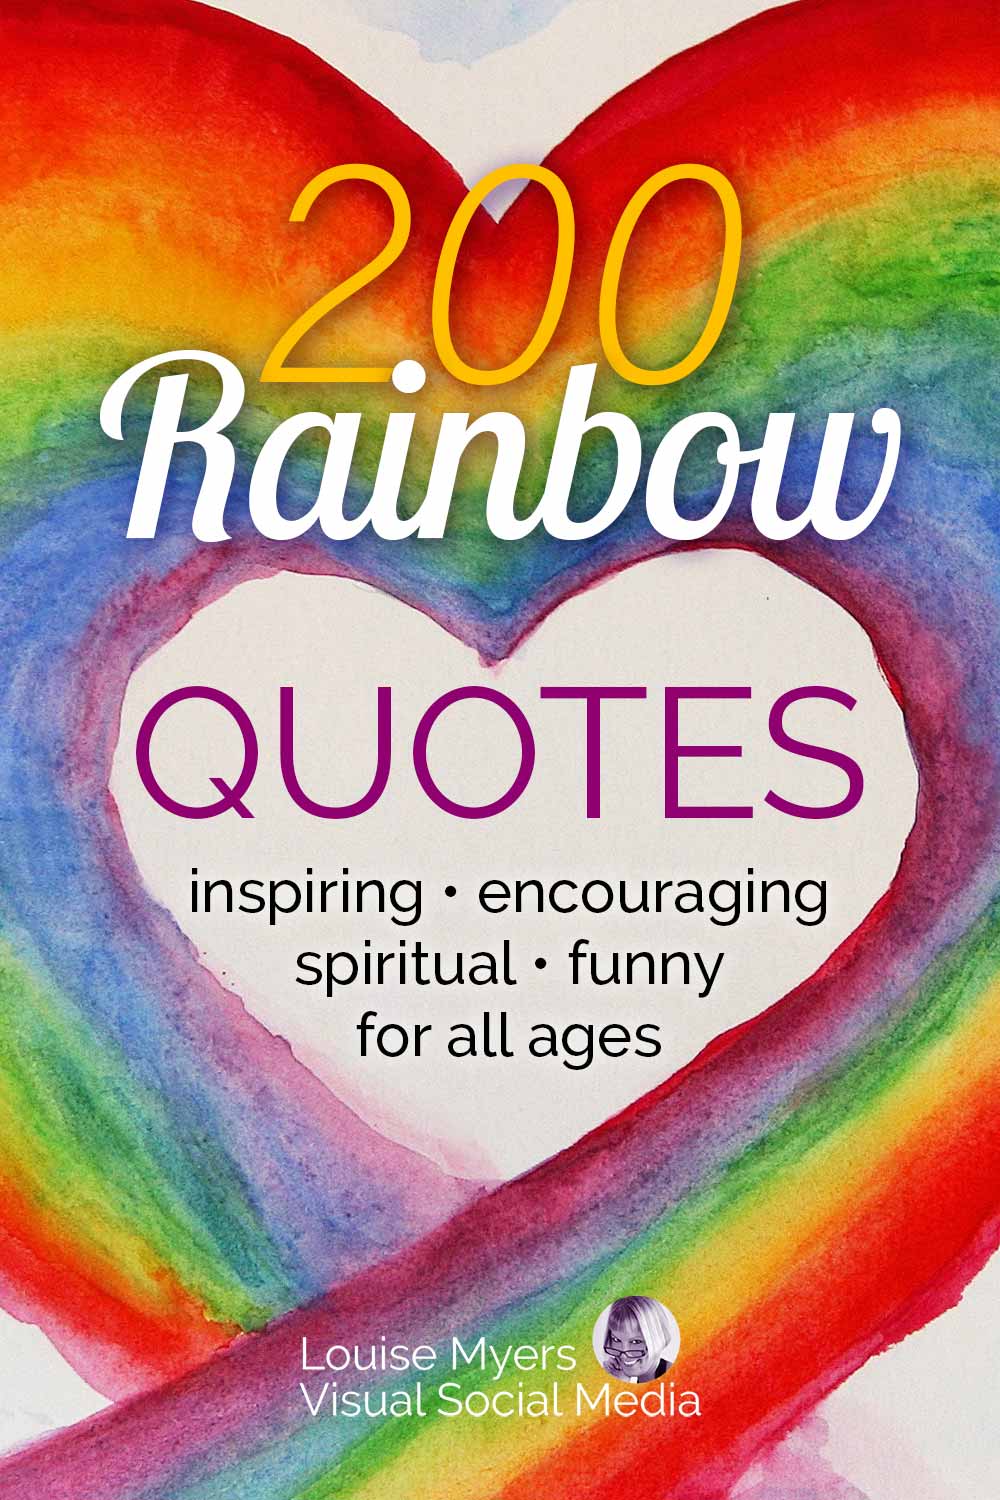 painting of double rainbow making heart shape says 200 rainbow quotes.